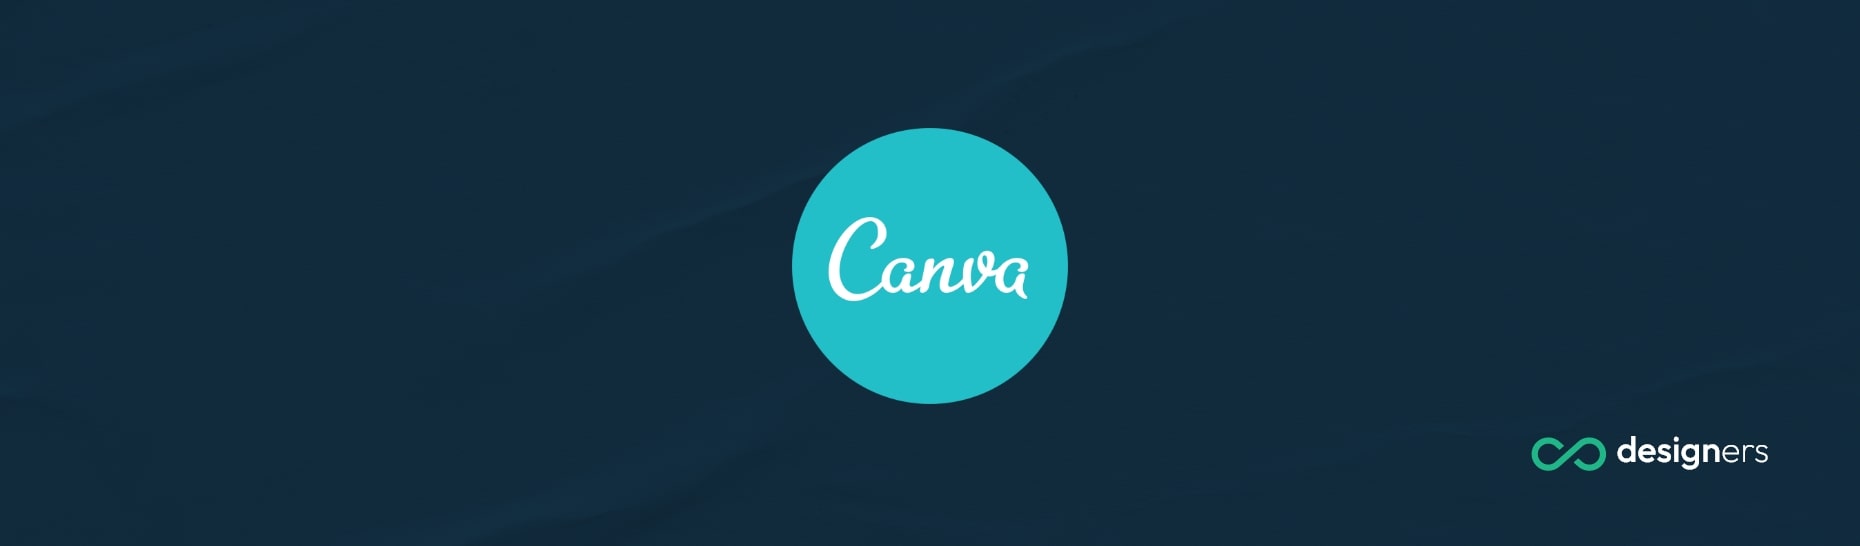 Why Is Canva Worth So Much?